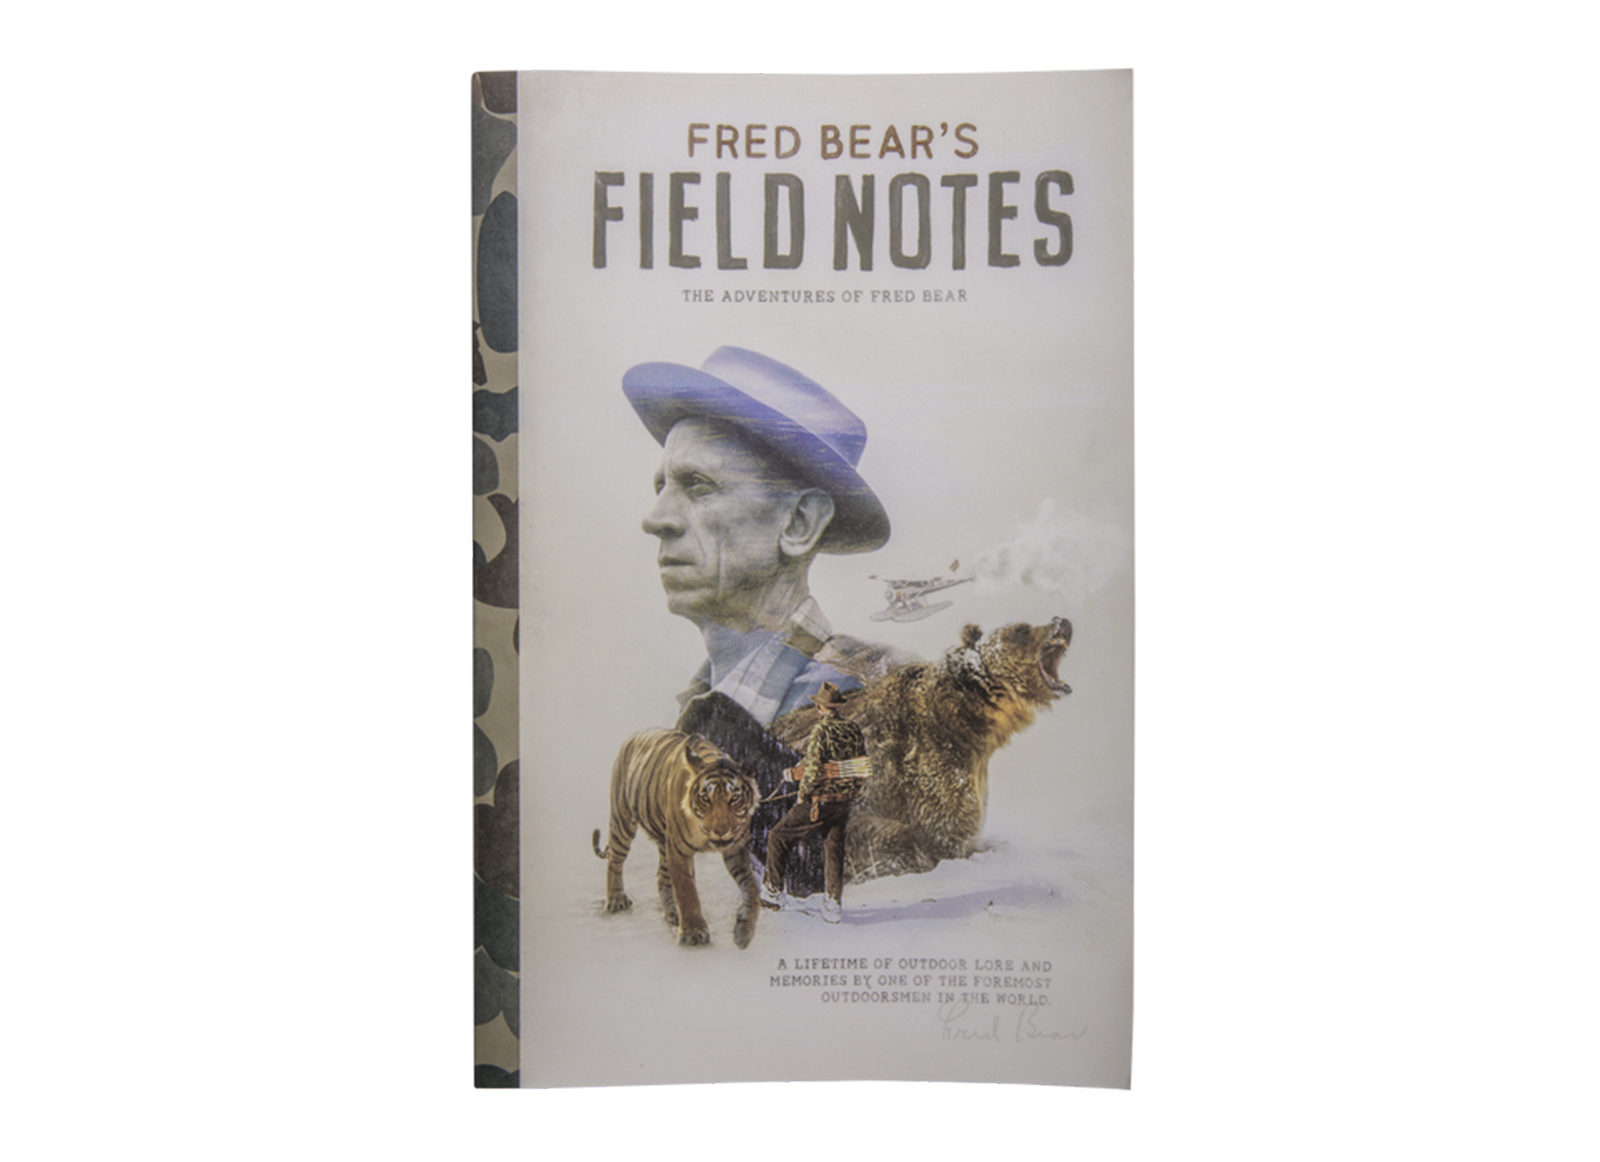 FRED BEAR FIELD NOTES